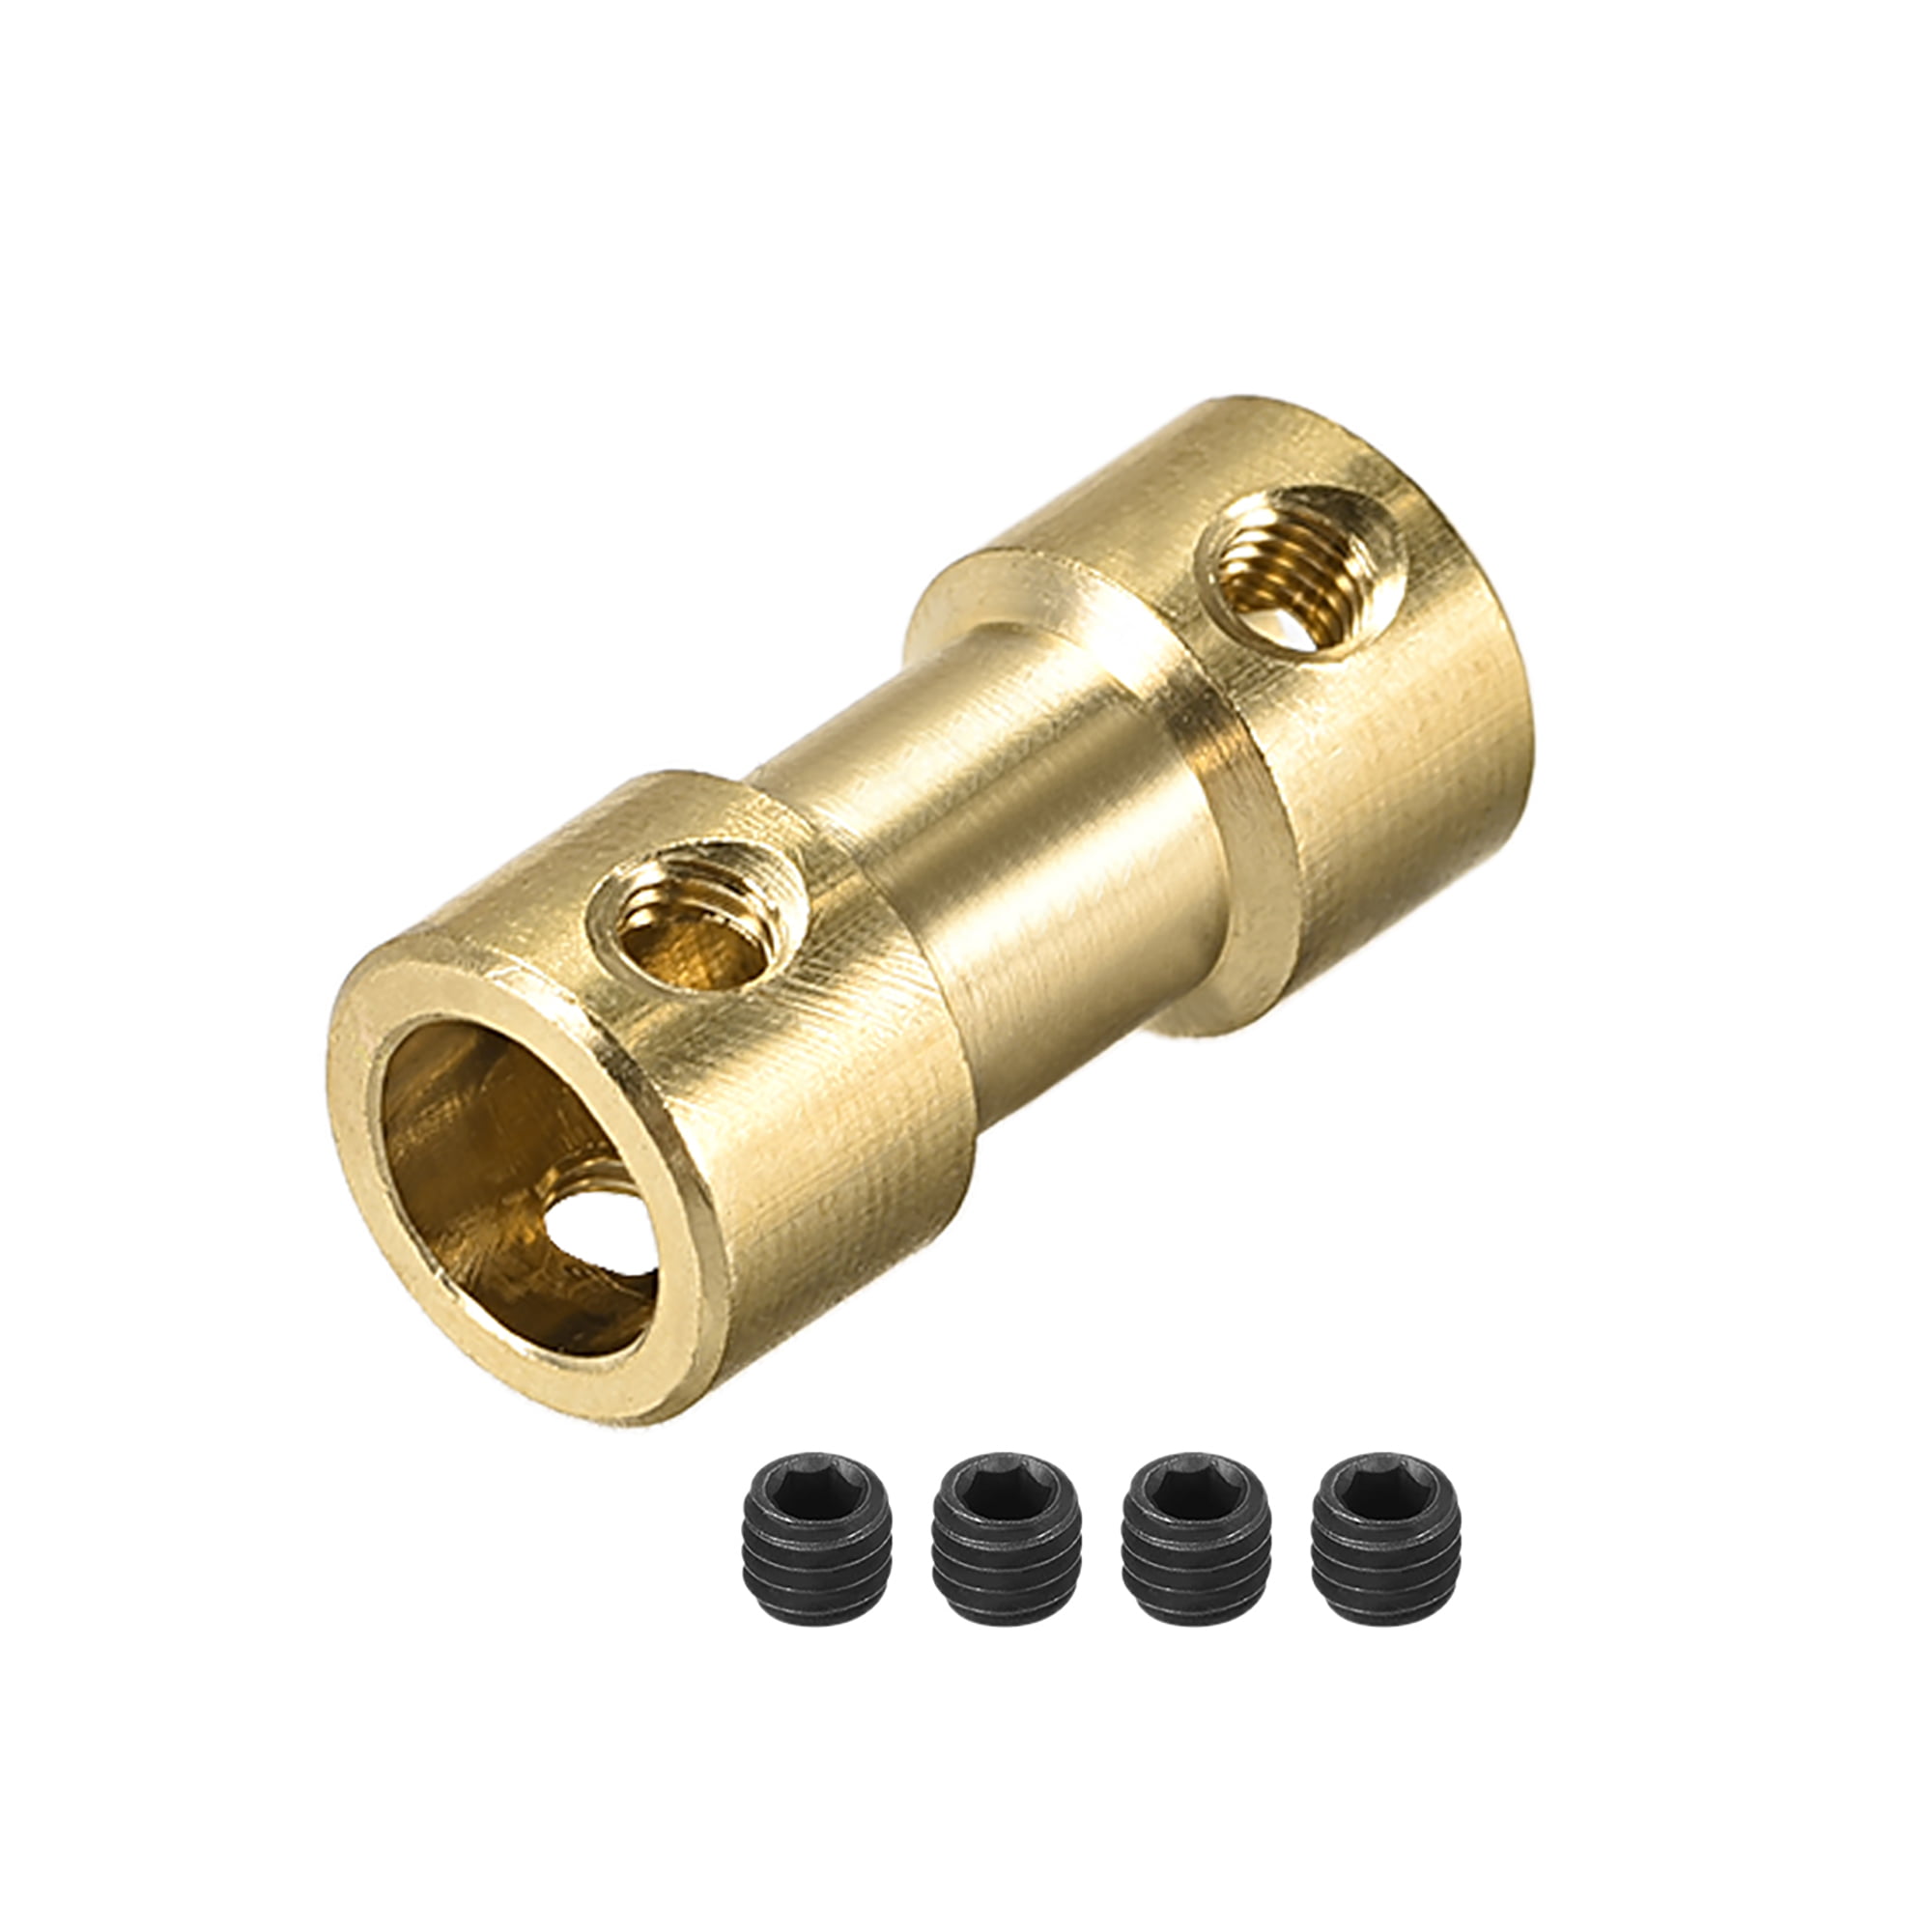 Compression 6mm Brass Straight Coupler Coupling Connector Copper Fitting new 